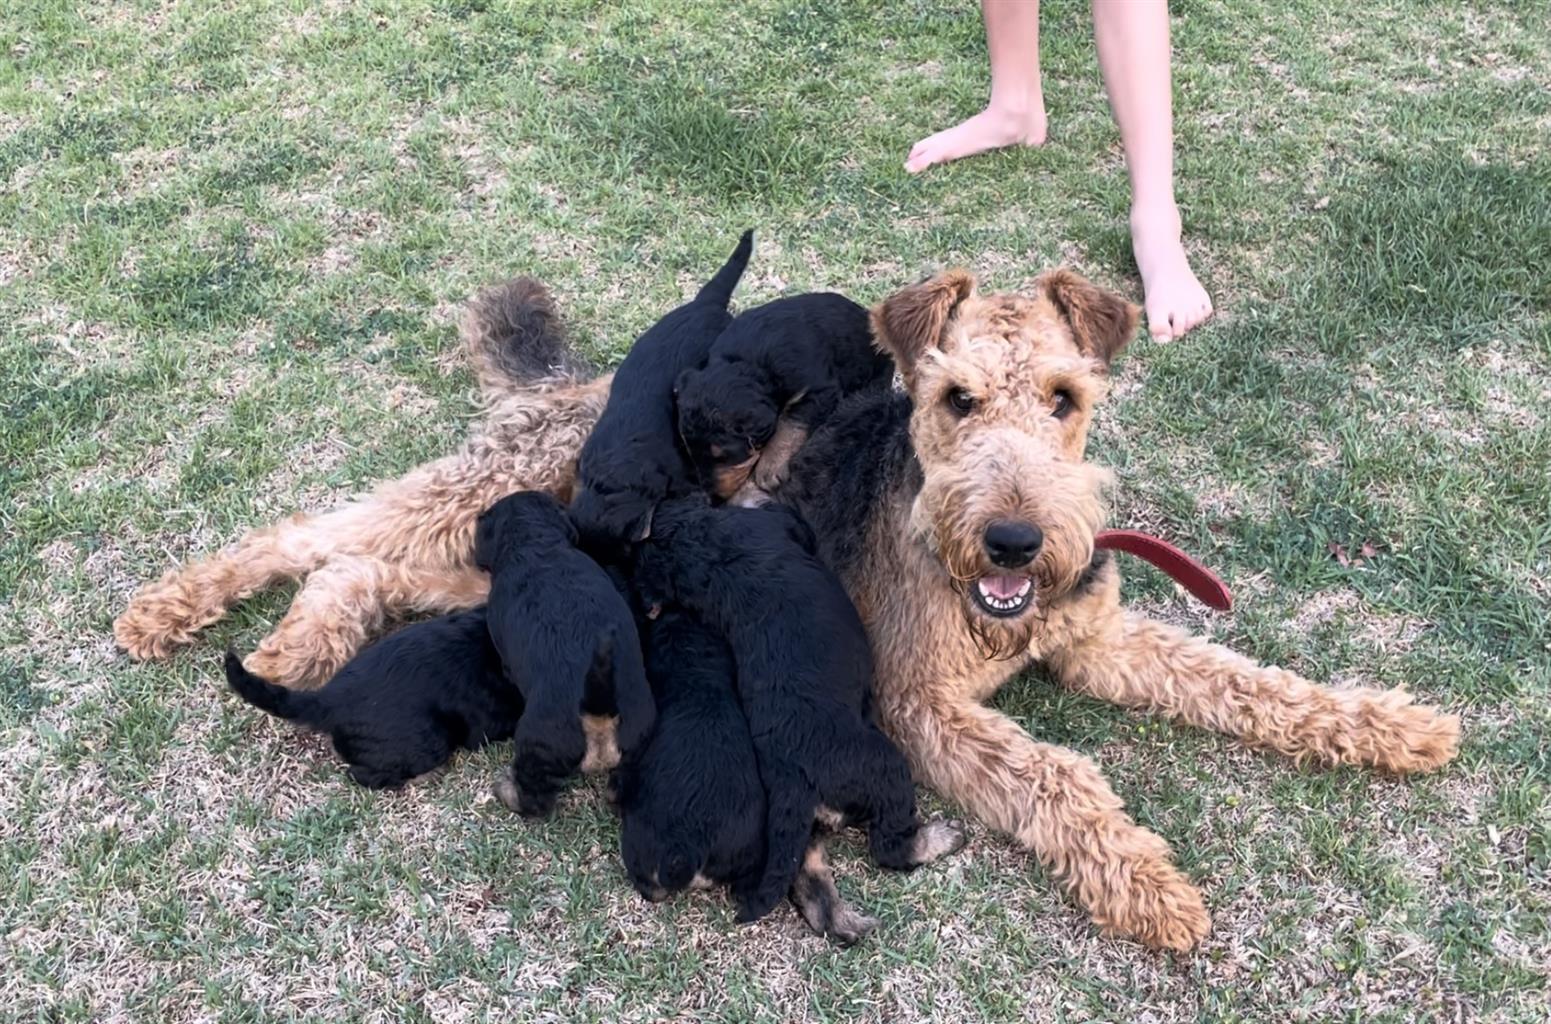 Airedale Puppies